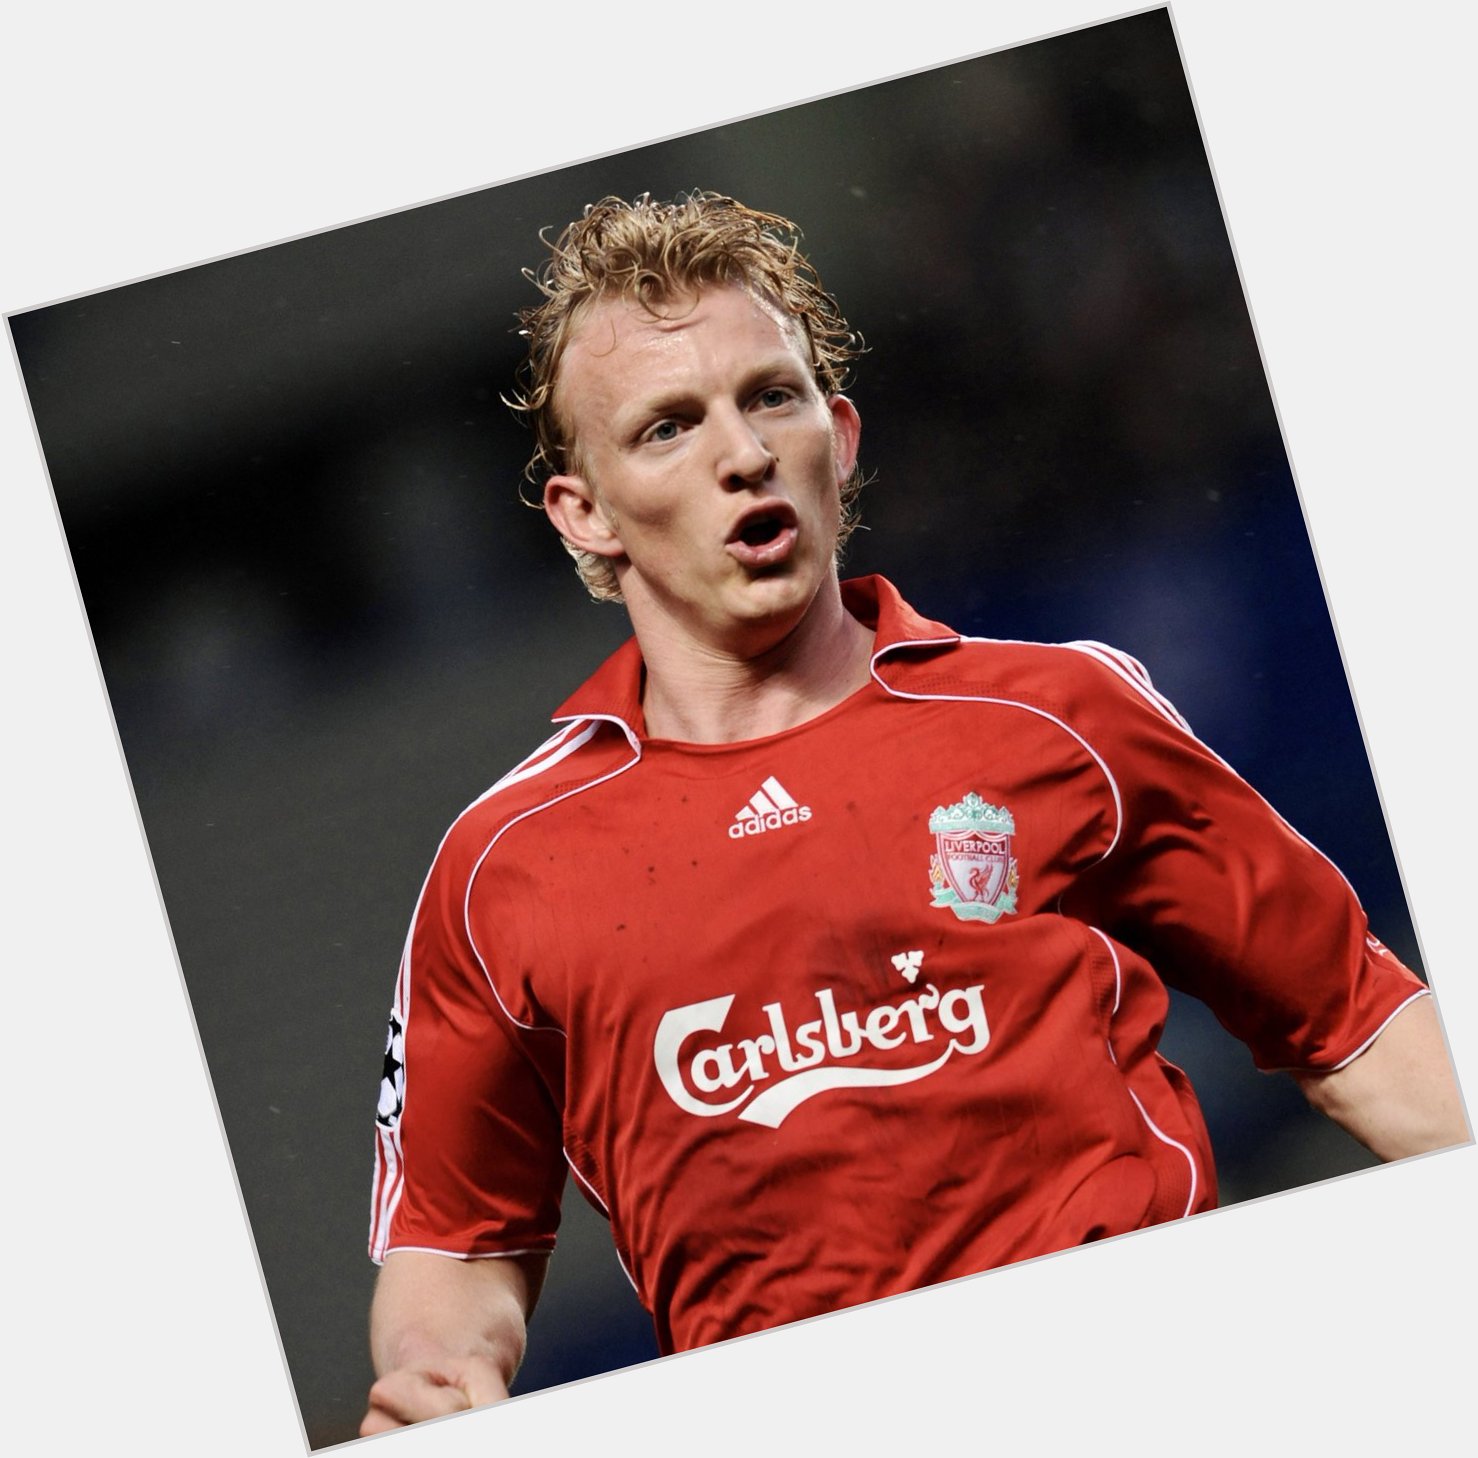 Happy 42nd birthday to Liverpool legend, Dirk Kuyt   : Etsuo Hara (Getty Images) 